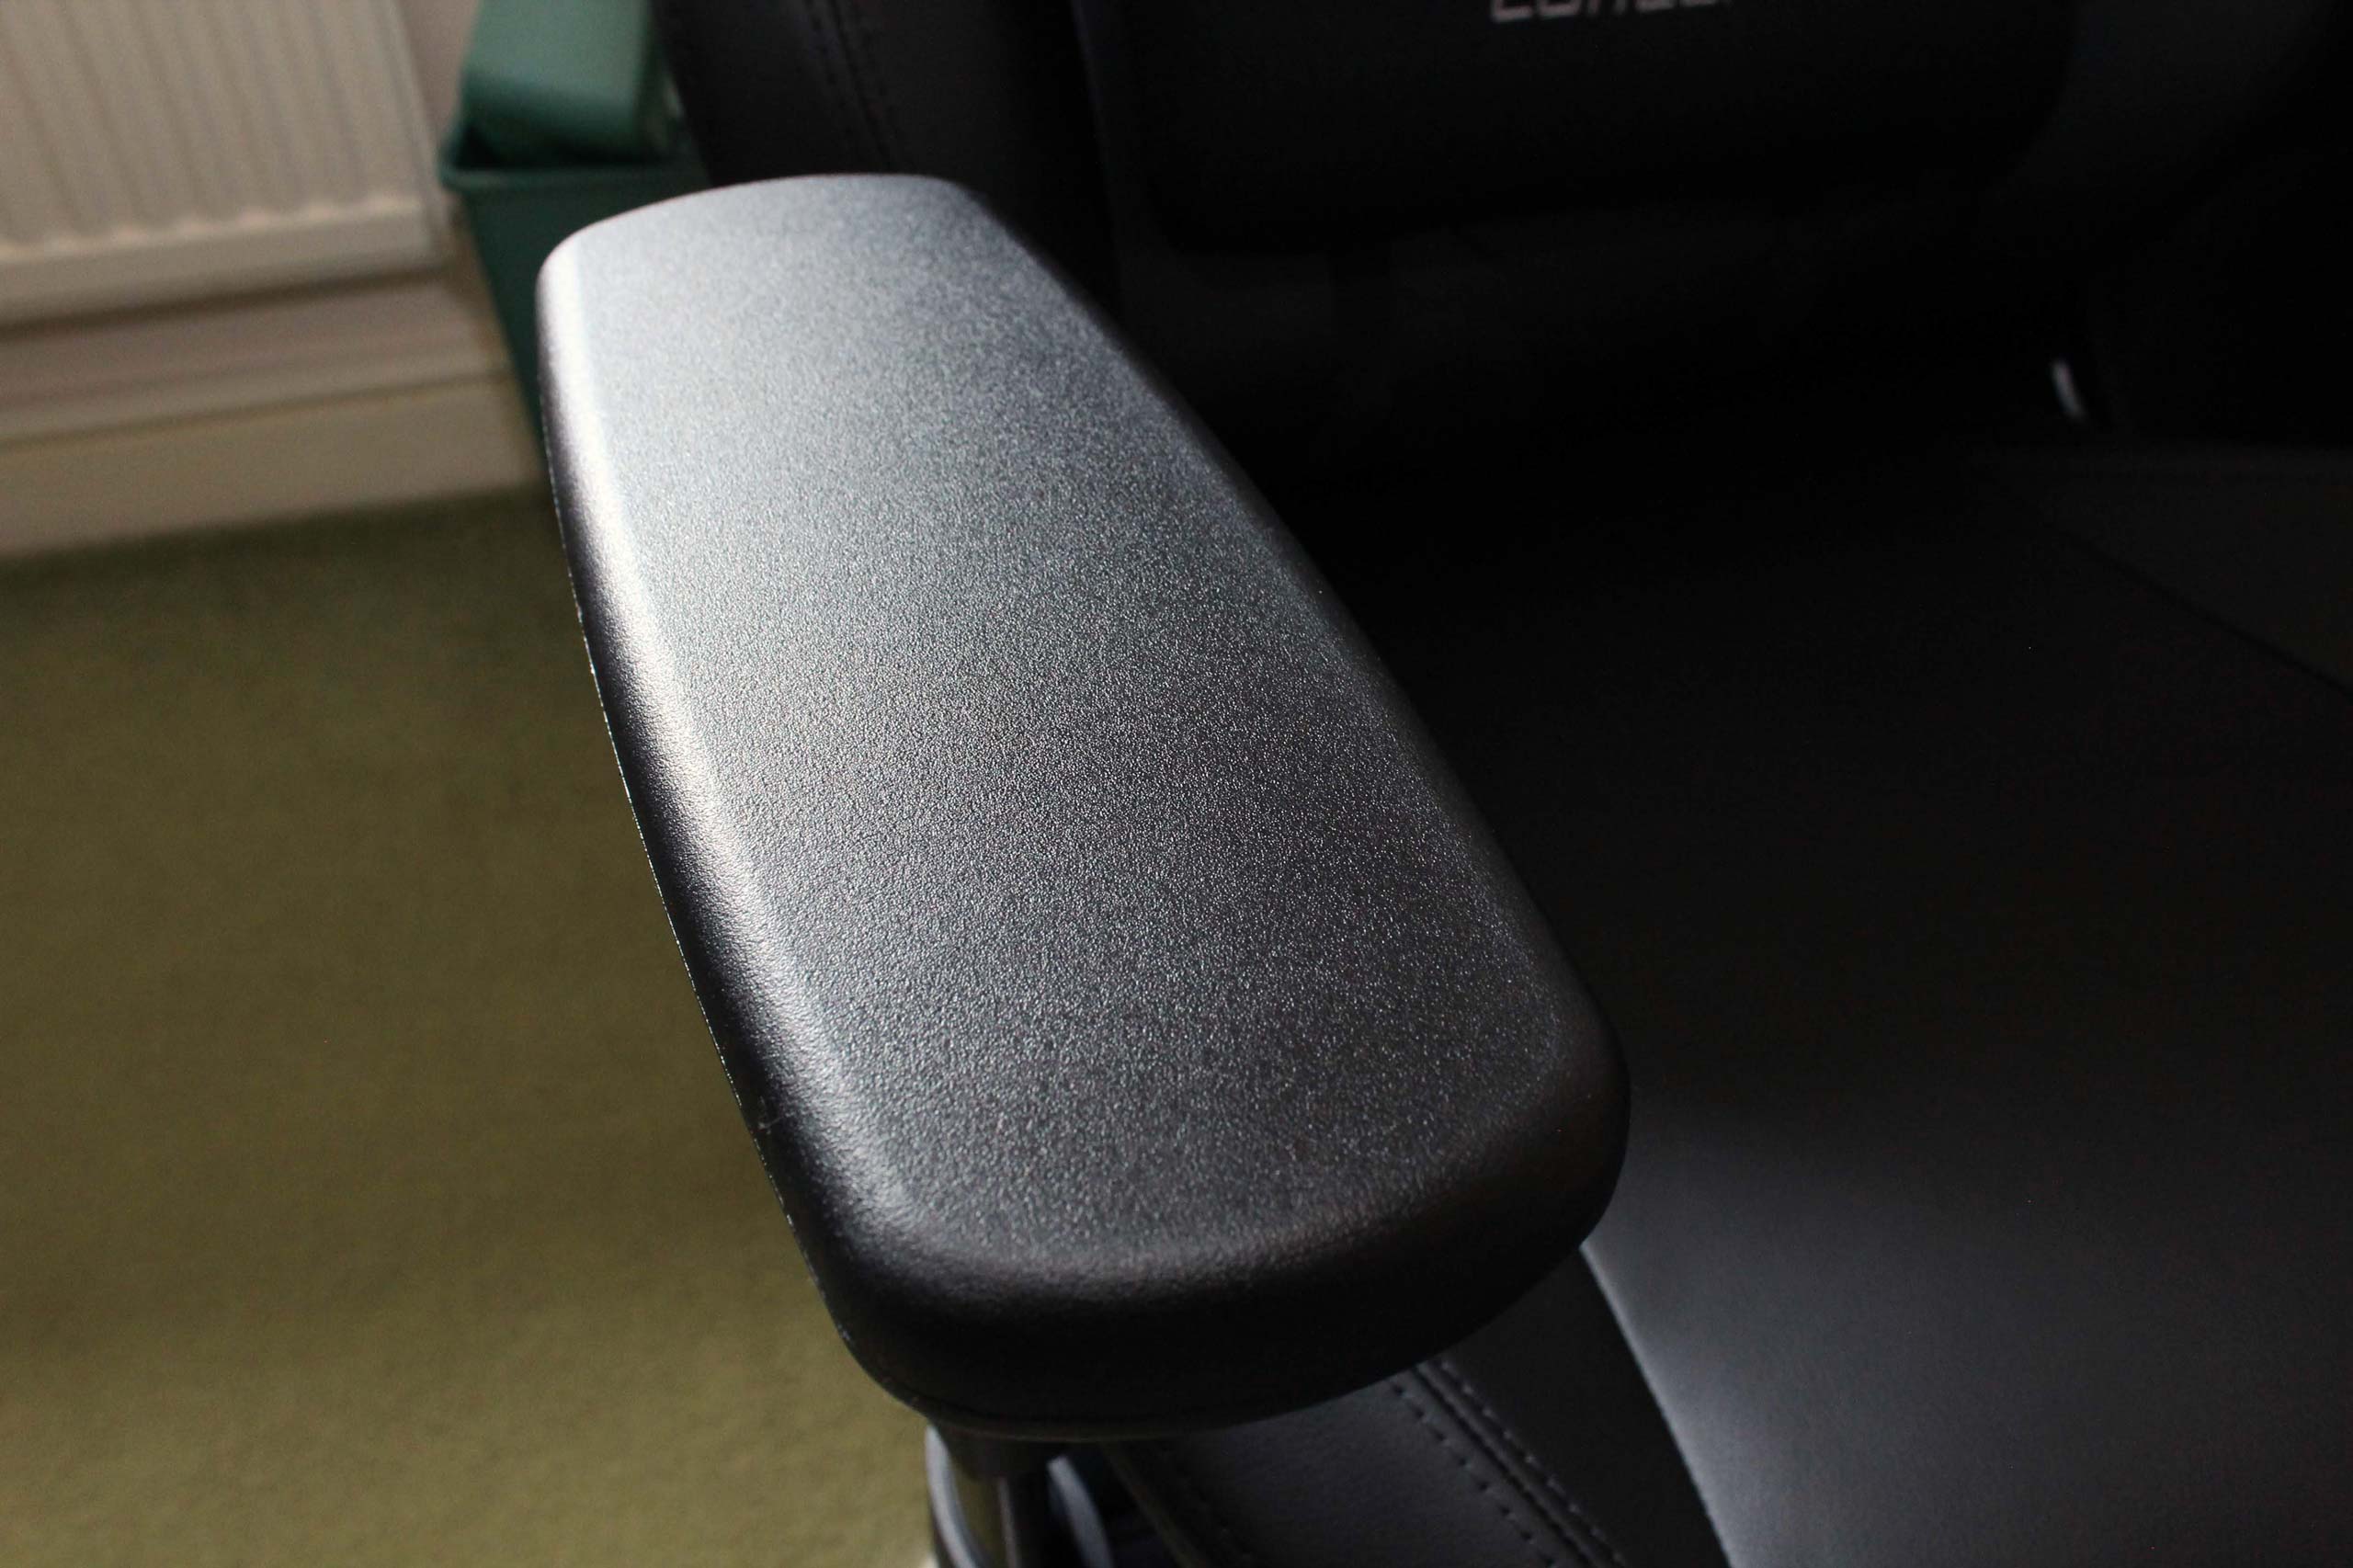 Nitro Concepts S300 Ex Gaming Chair Review Vgu